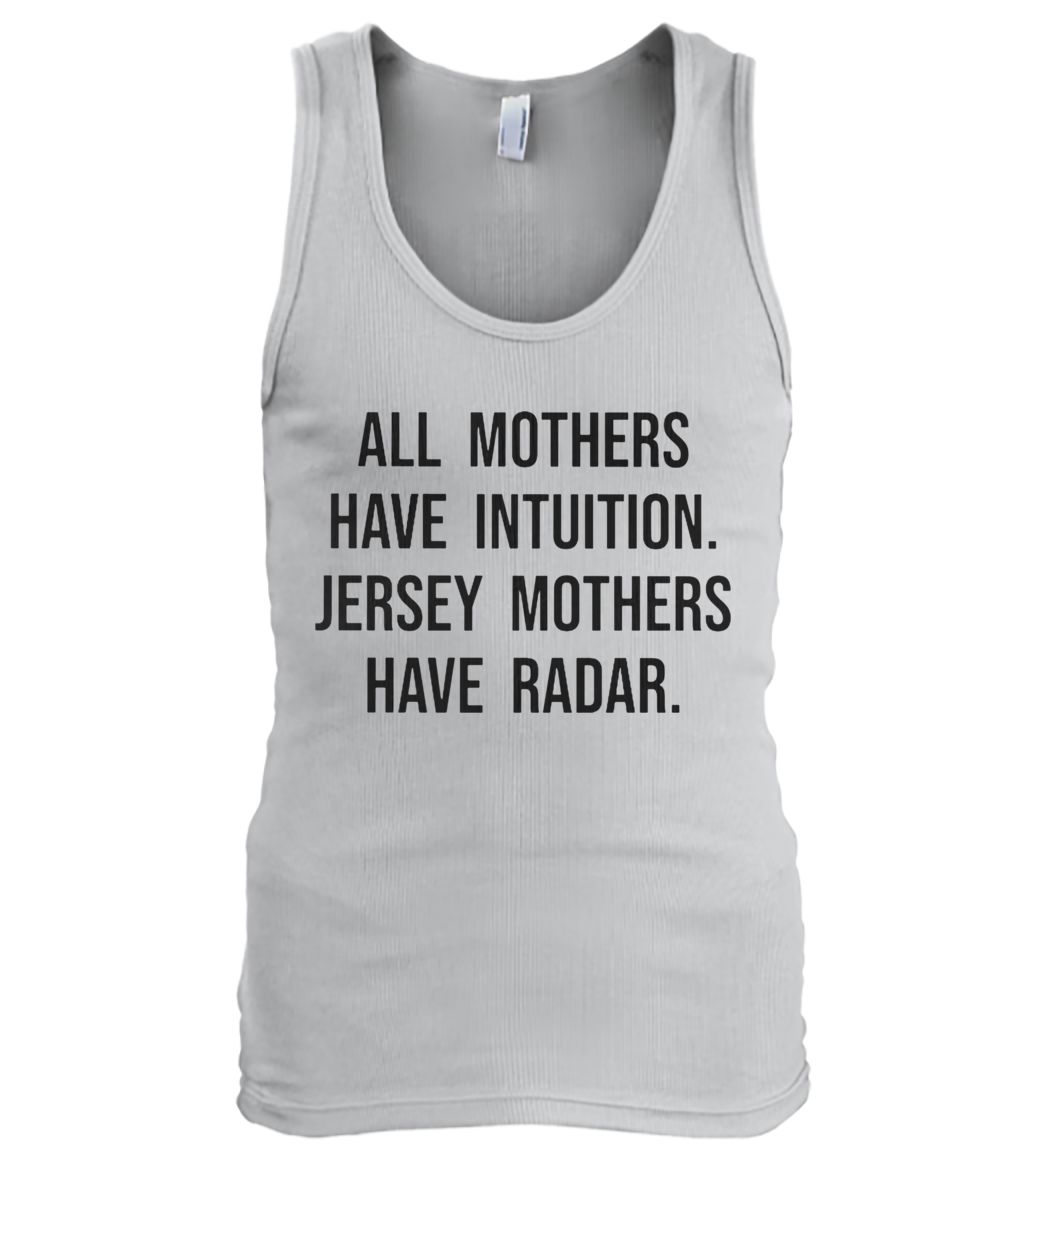 All mothers have intuition jersey mothers have radar men's tank top